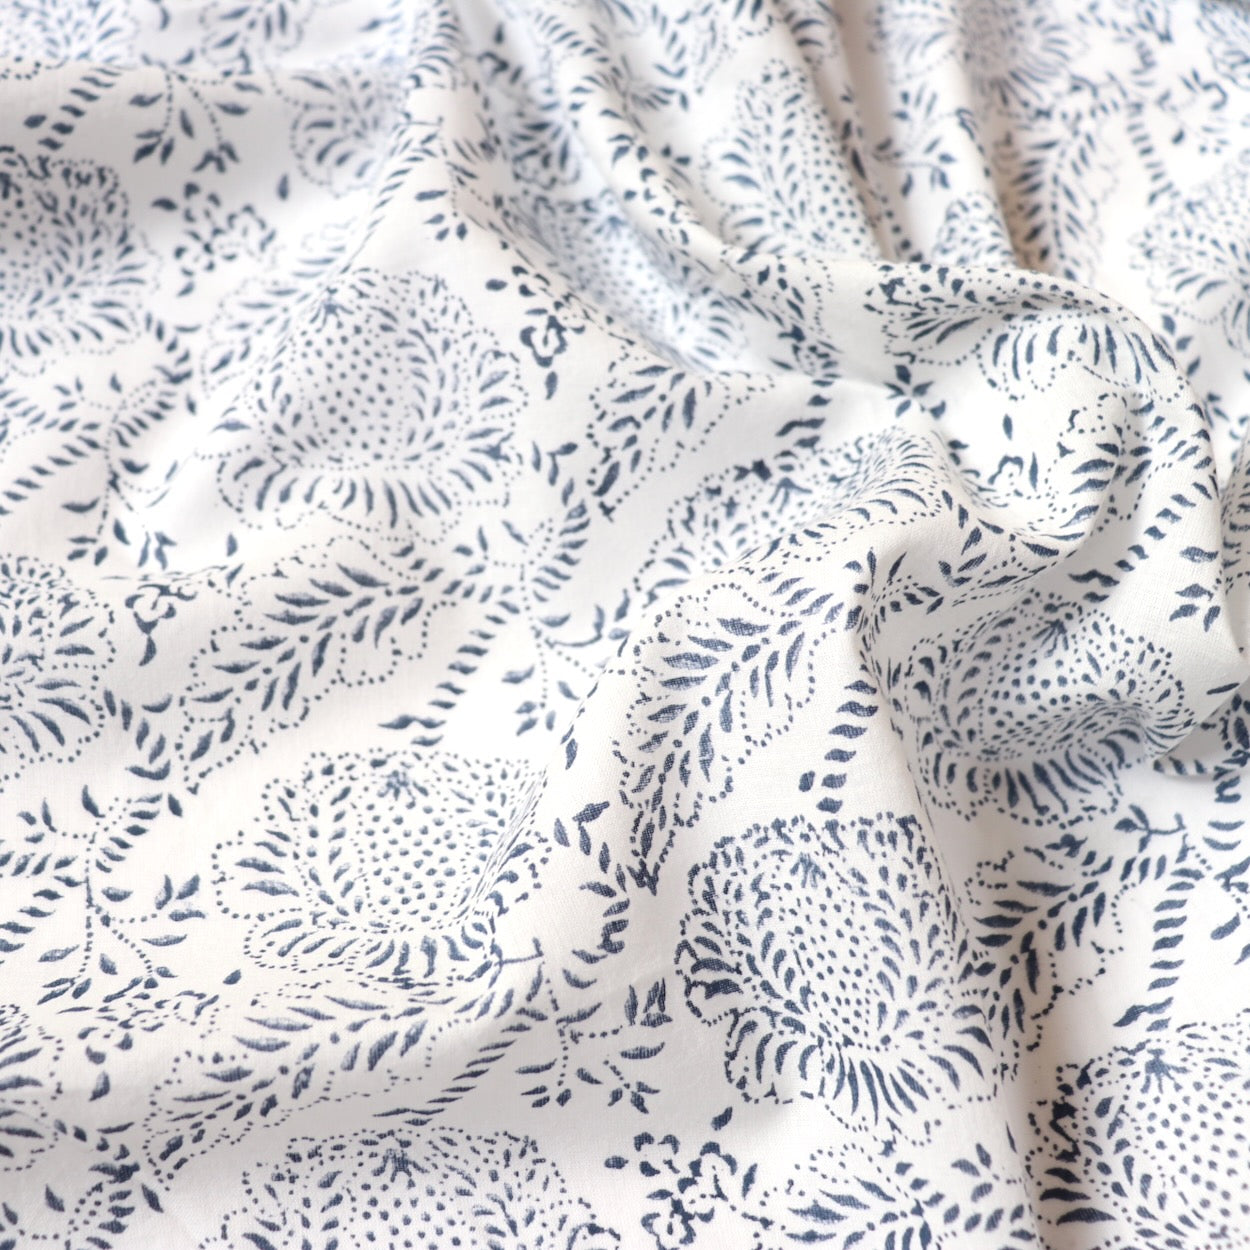 navy and white roses hand block print cotton voile for summer sewing and home decor